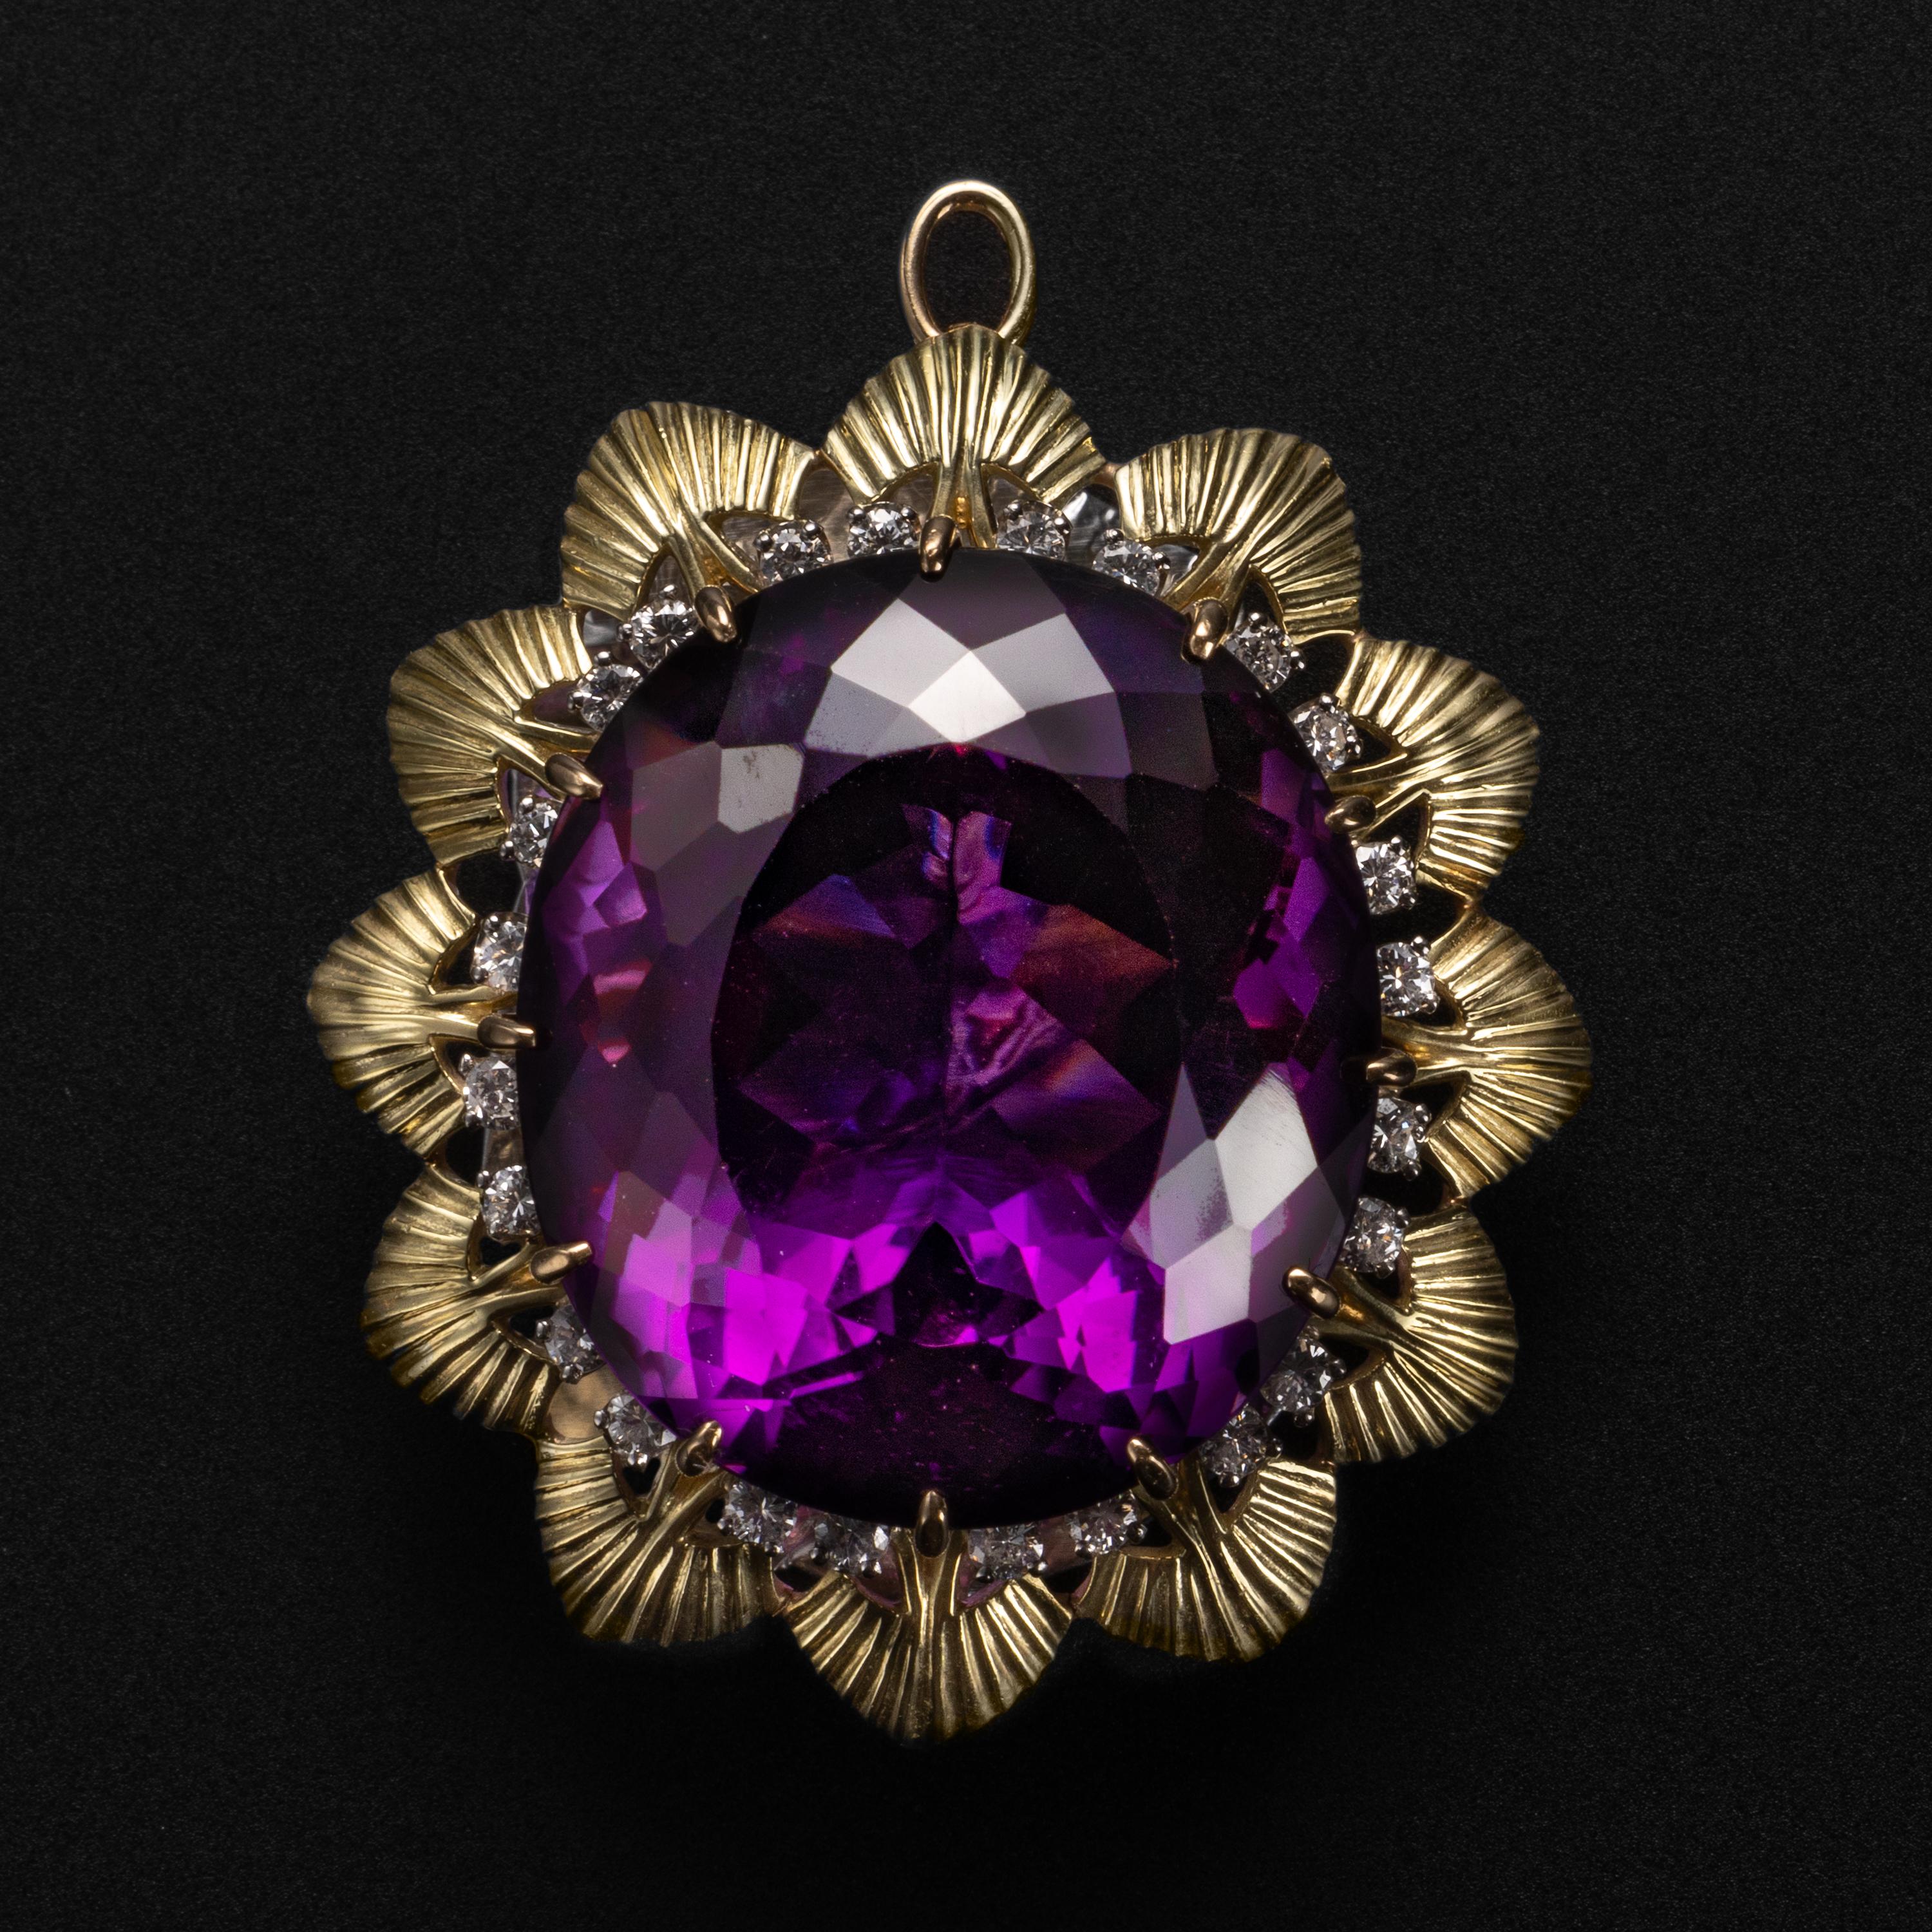 Huge Amethyst Pendant or Brooch with Diamonds 55 Carats 3